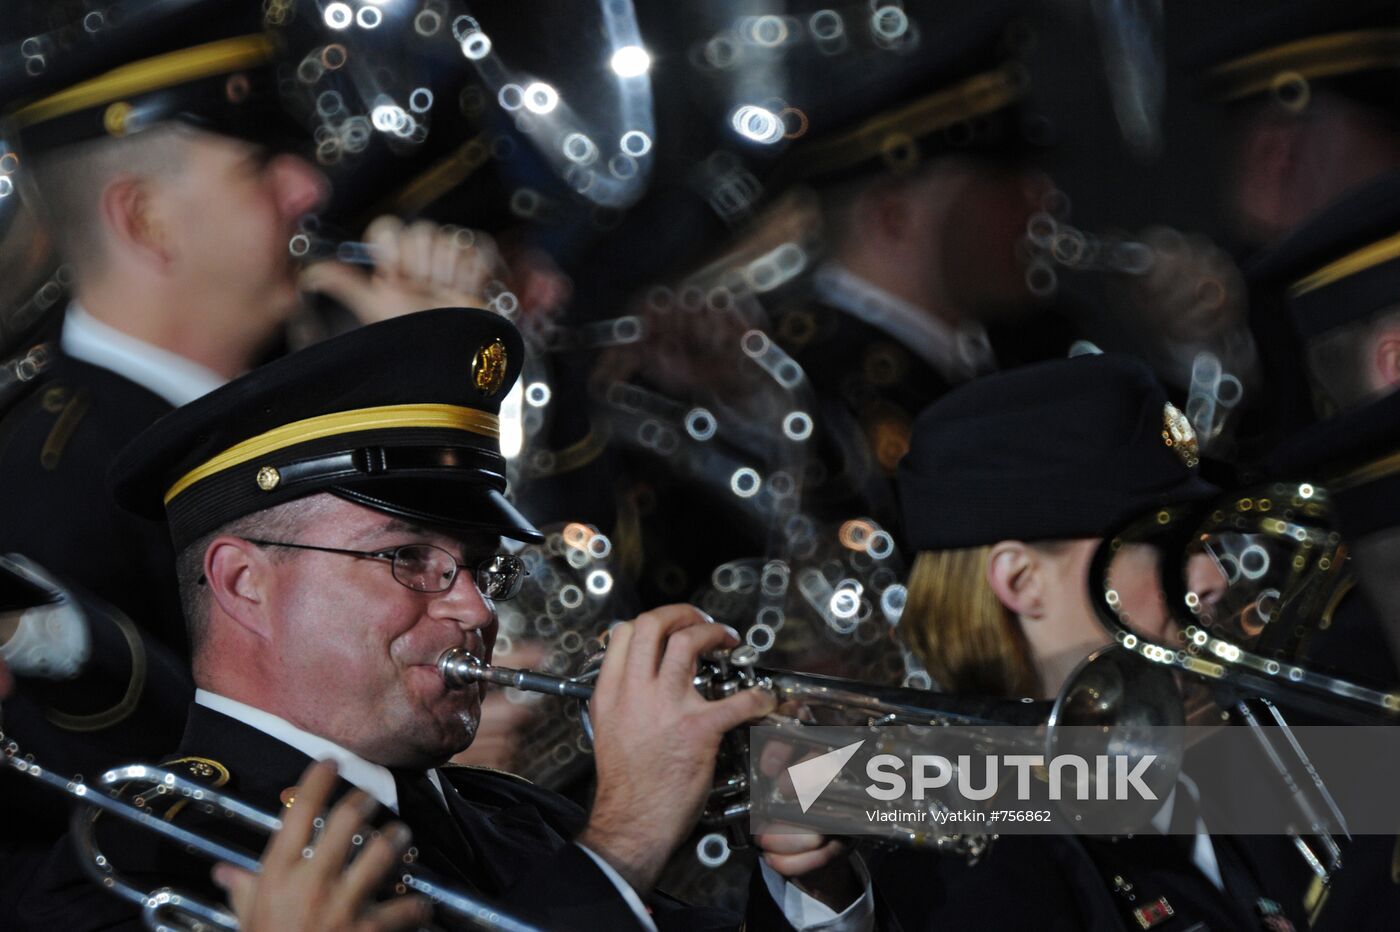 Closing ceremony of Spasskaya Tower festival of military bands